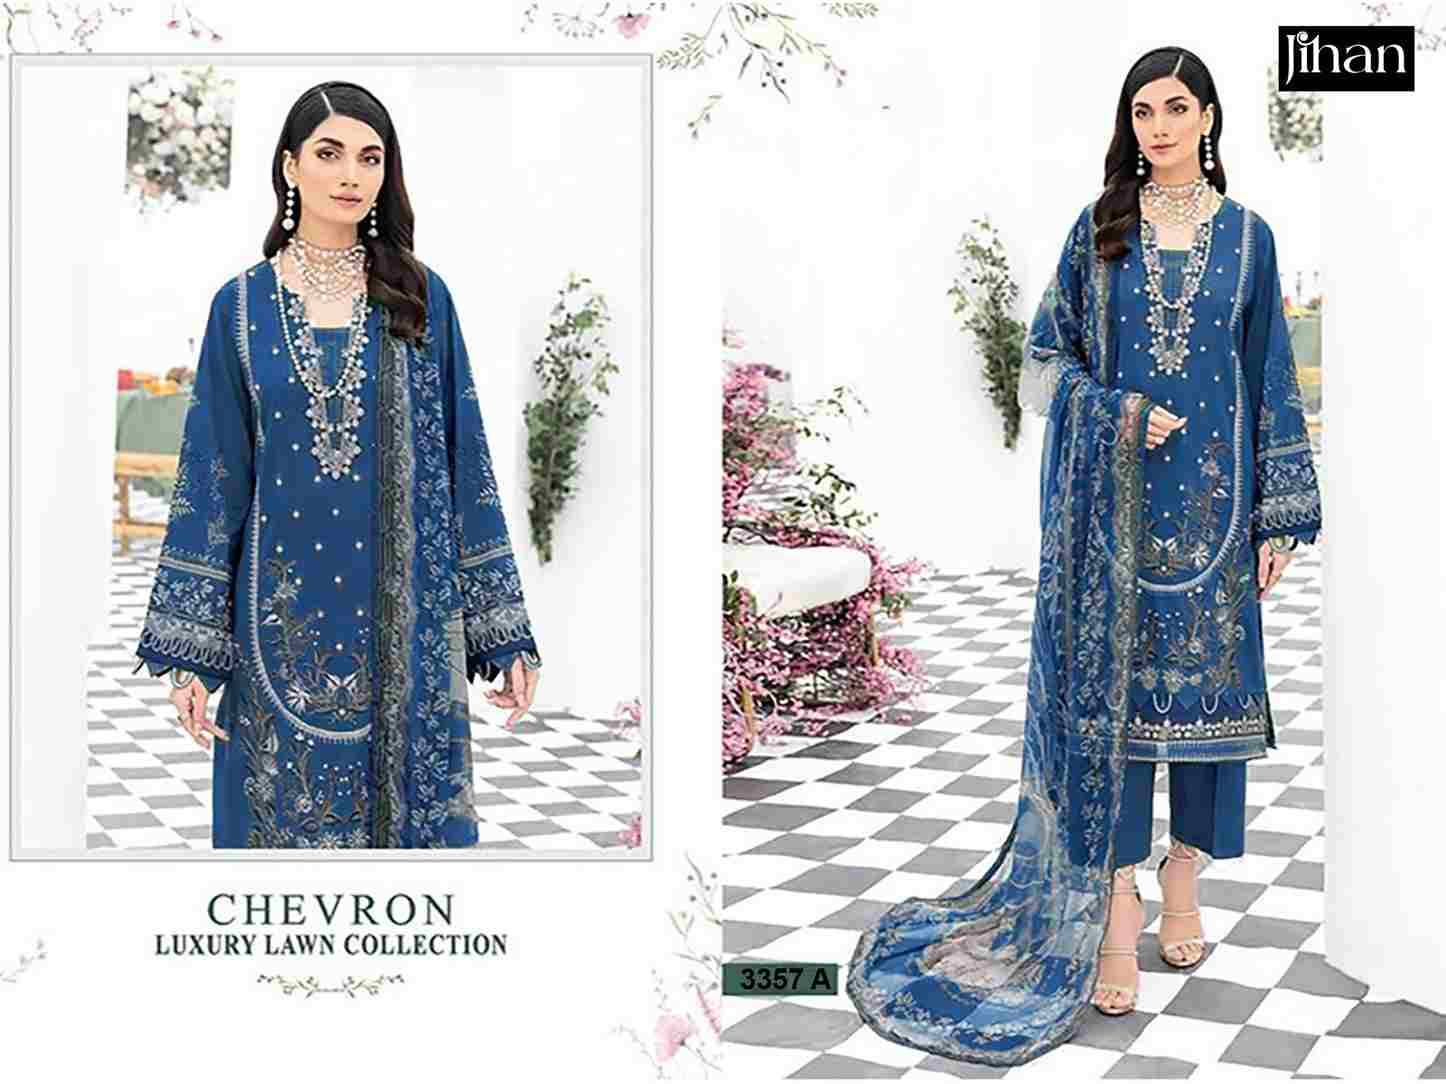 Chevron Luxury Lawn Collection By Jihan 3357 To 3357-B Series Beautiful Pakistani Suits Stylish Fancy Colorful Party Wear & Occasional Wear Pure Lawn Cotton Embroidered Dresses At Wholesale Price